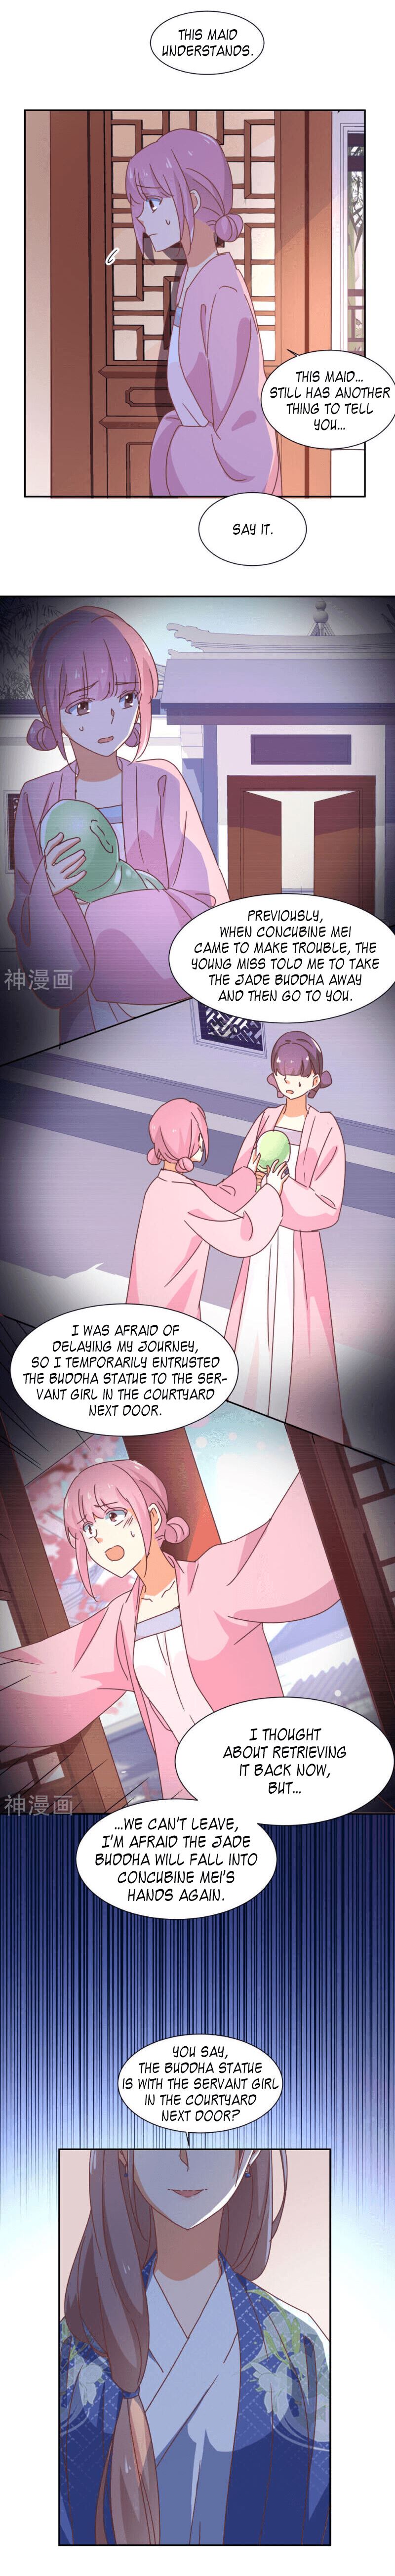 The Genius Princess's Road to Becoming Empress Ch. 15 Resolution